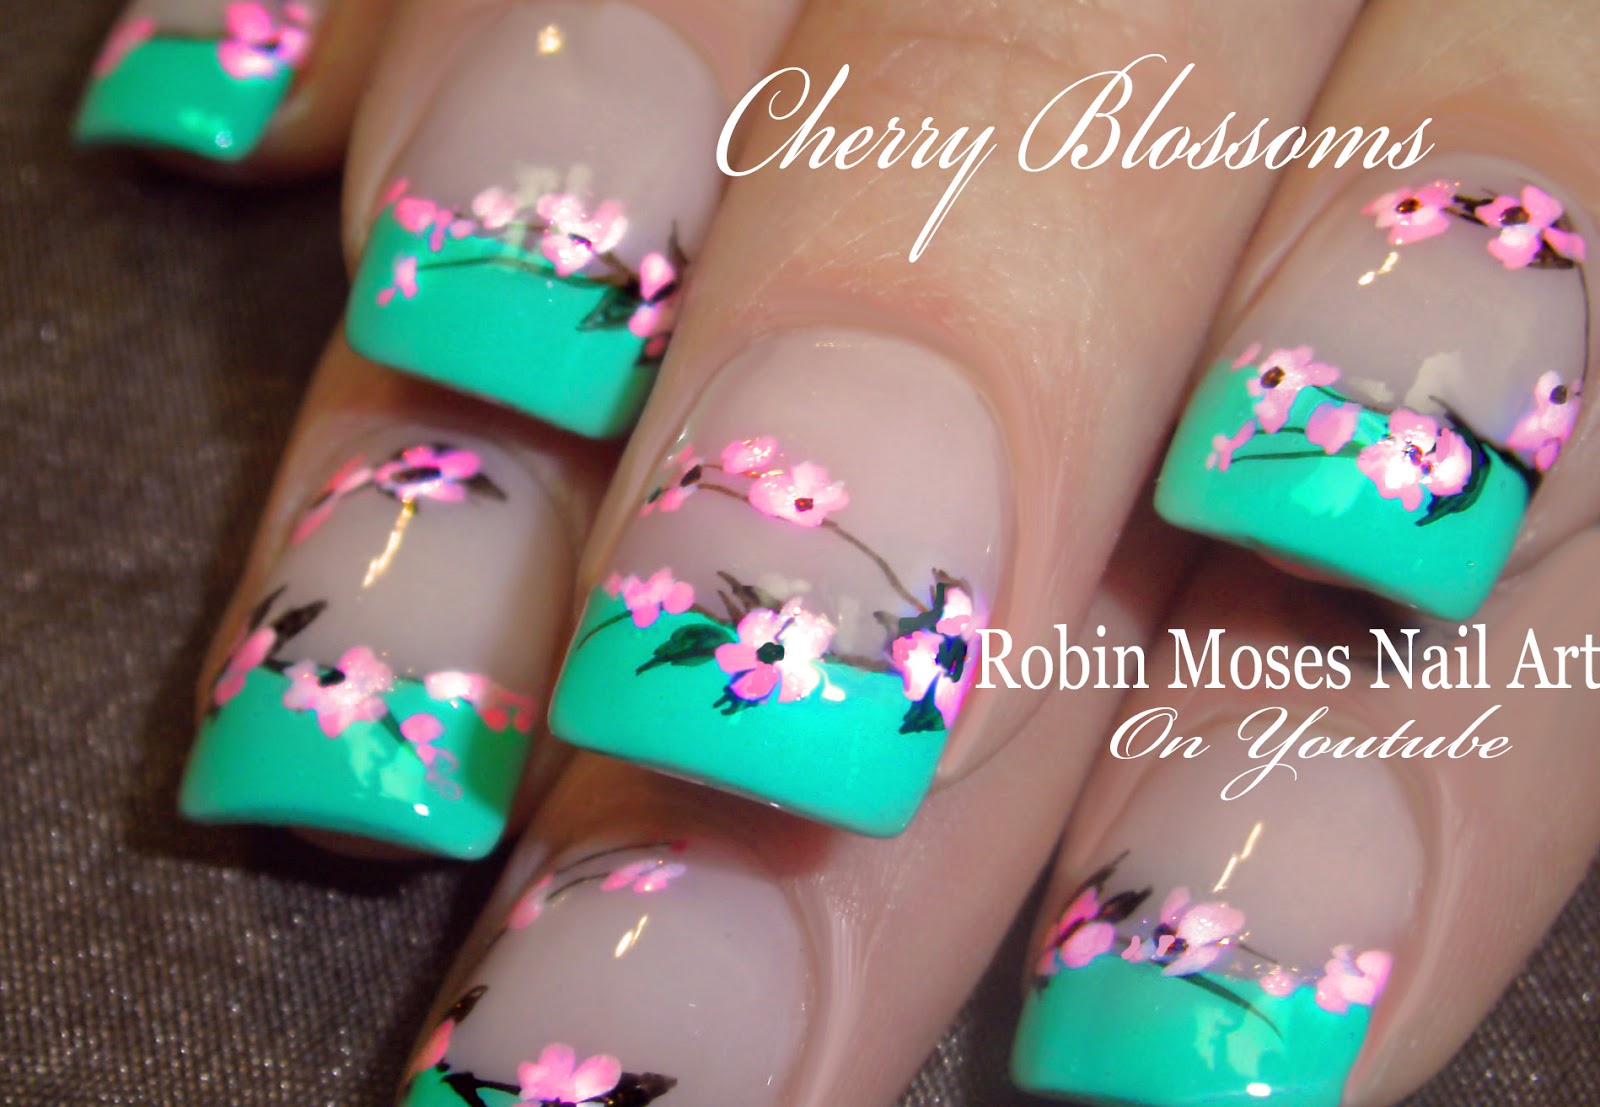 3. Tiger Lily Nail Art Ideas - wide 1